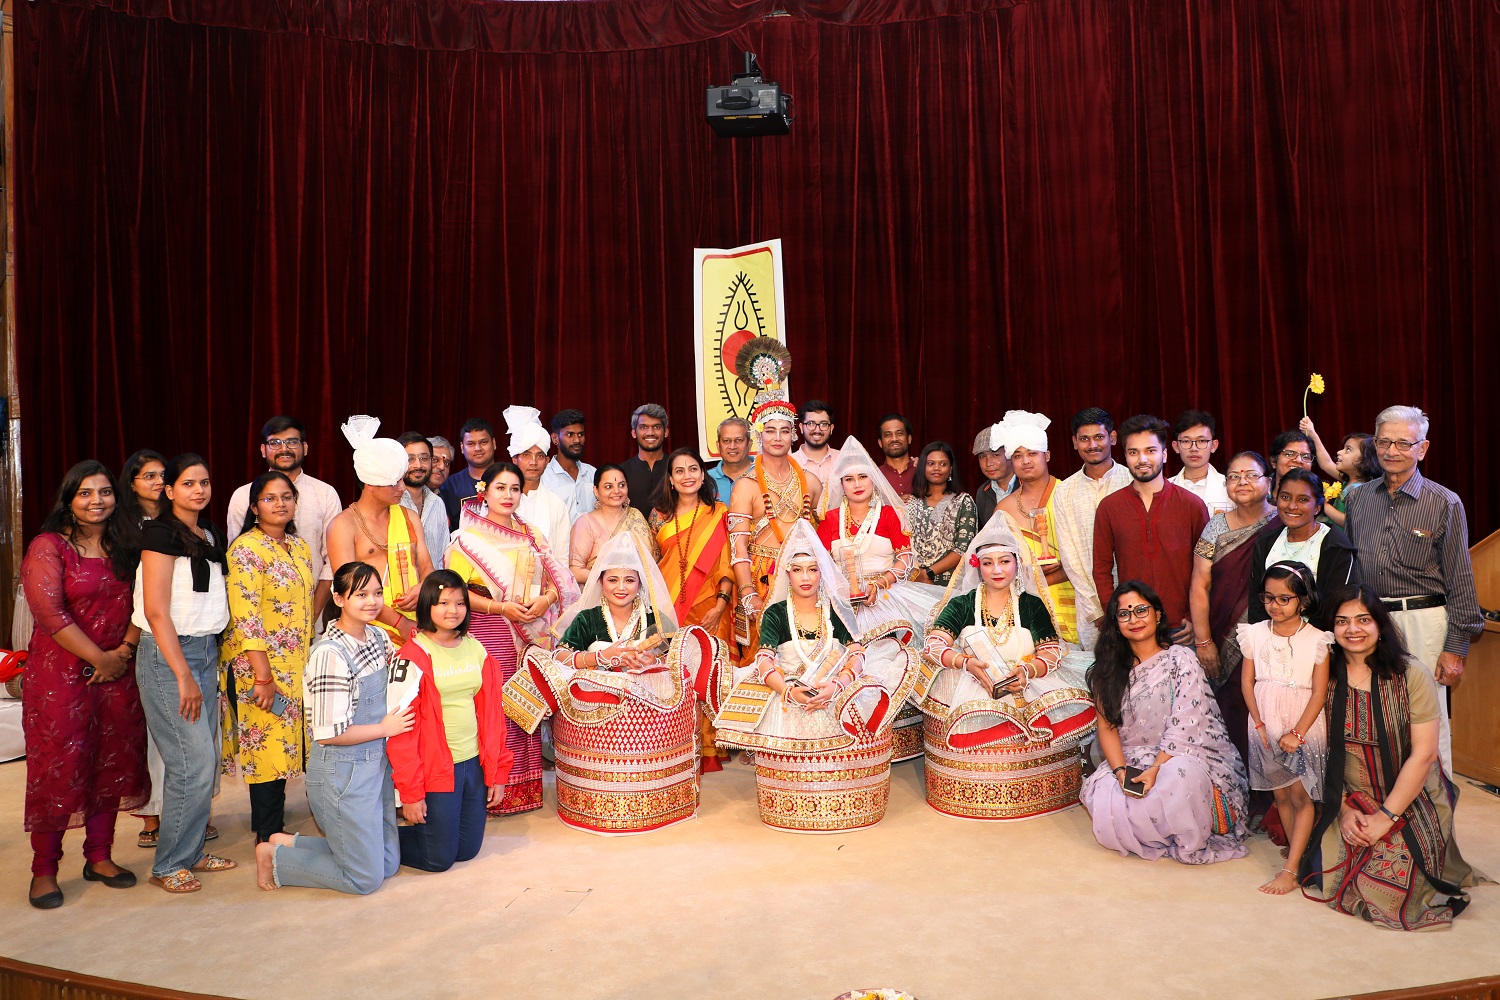 The IIMB Chapter of SPICMACAY hosted an evening of Manipuri dance by Dr Manju Elangbam and team on 30th October 2022.